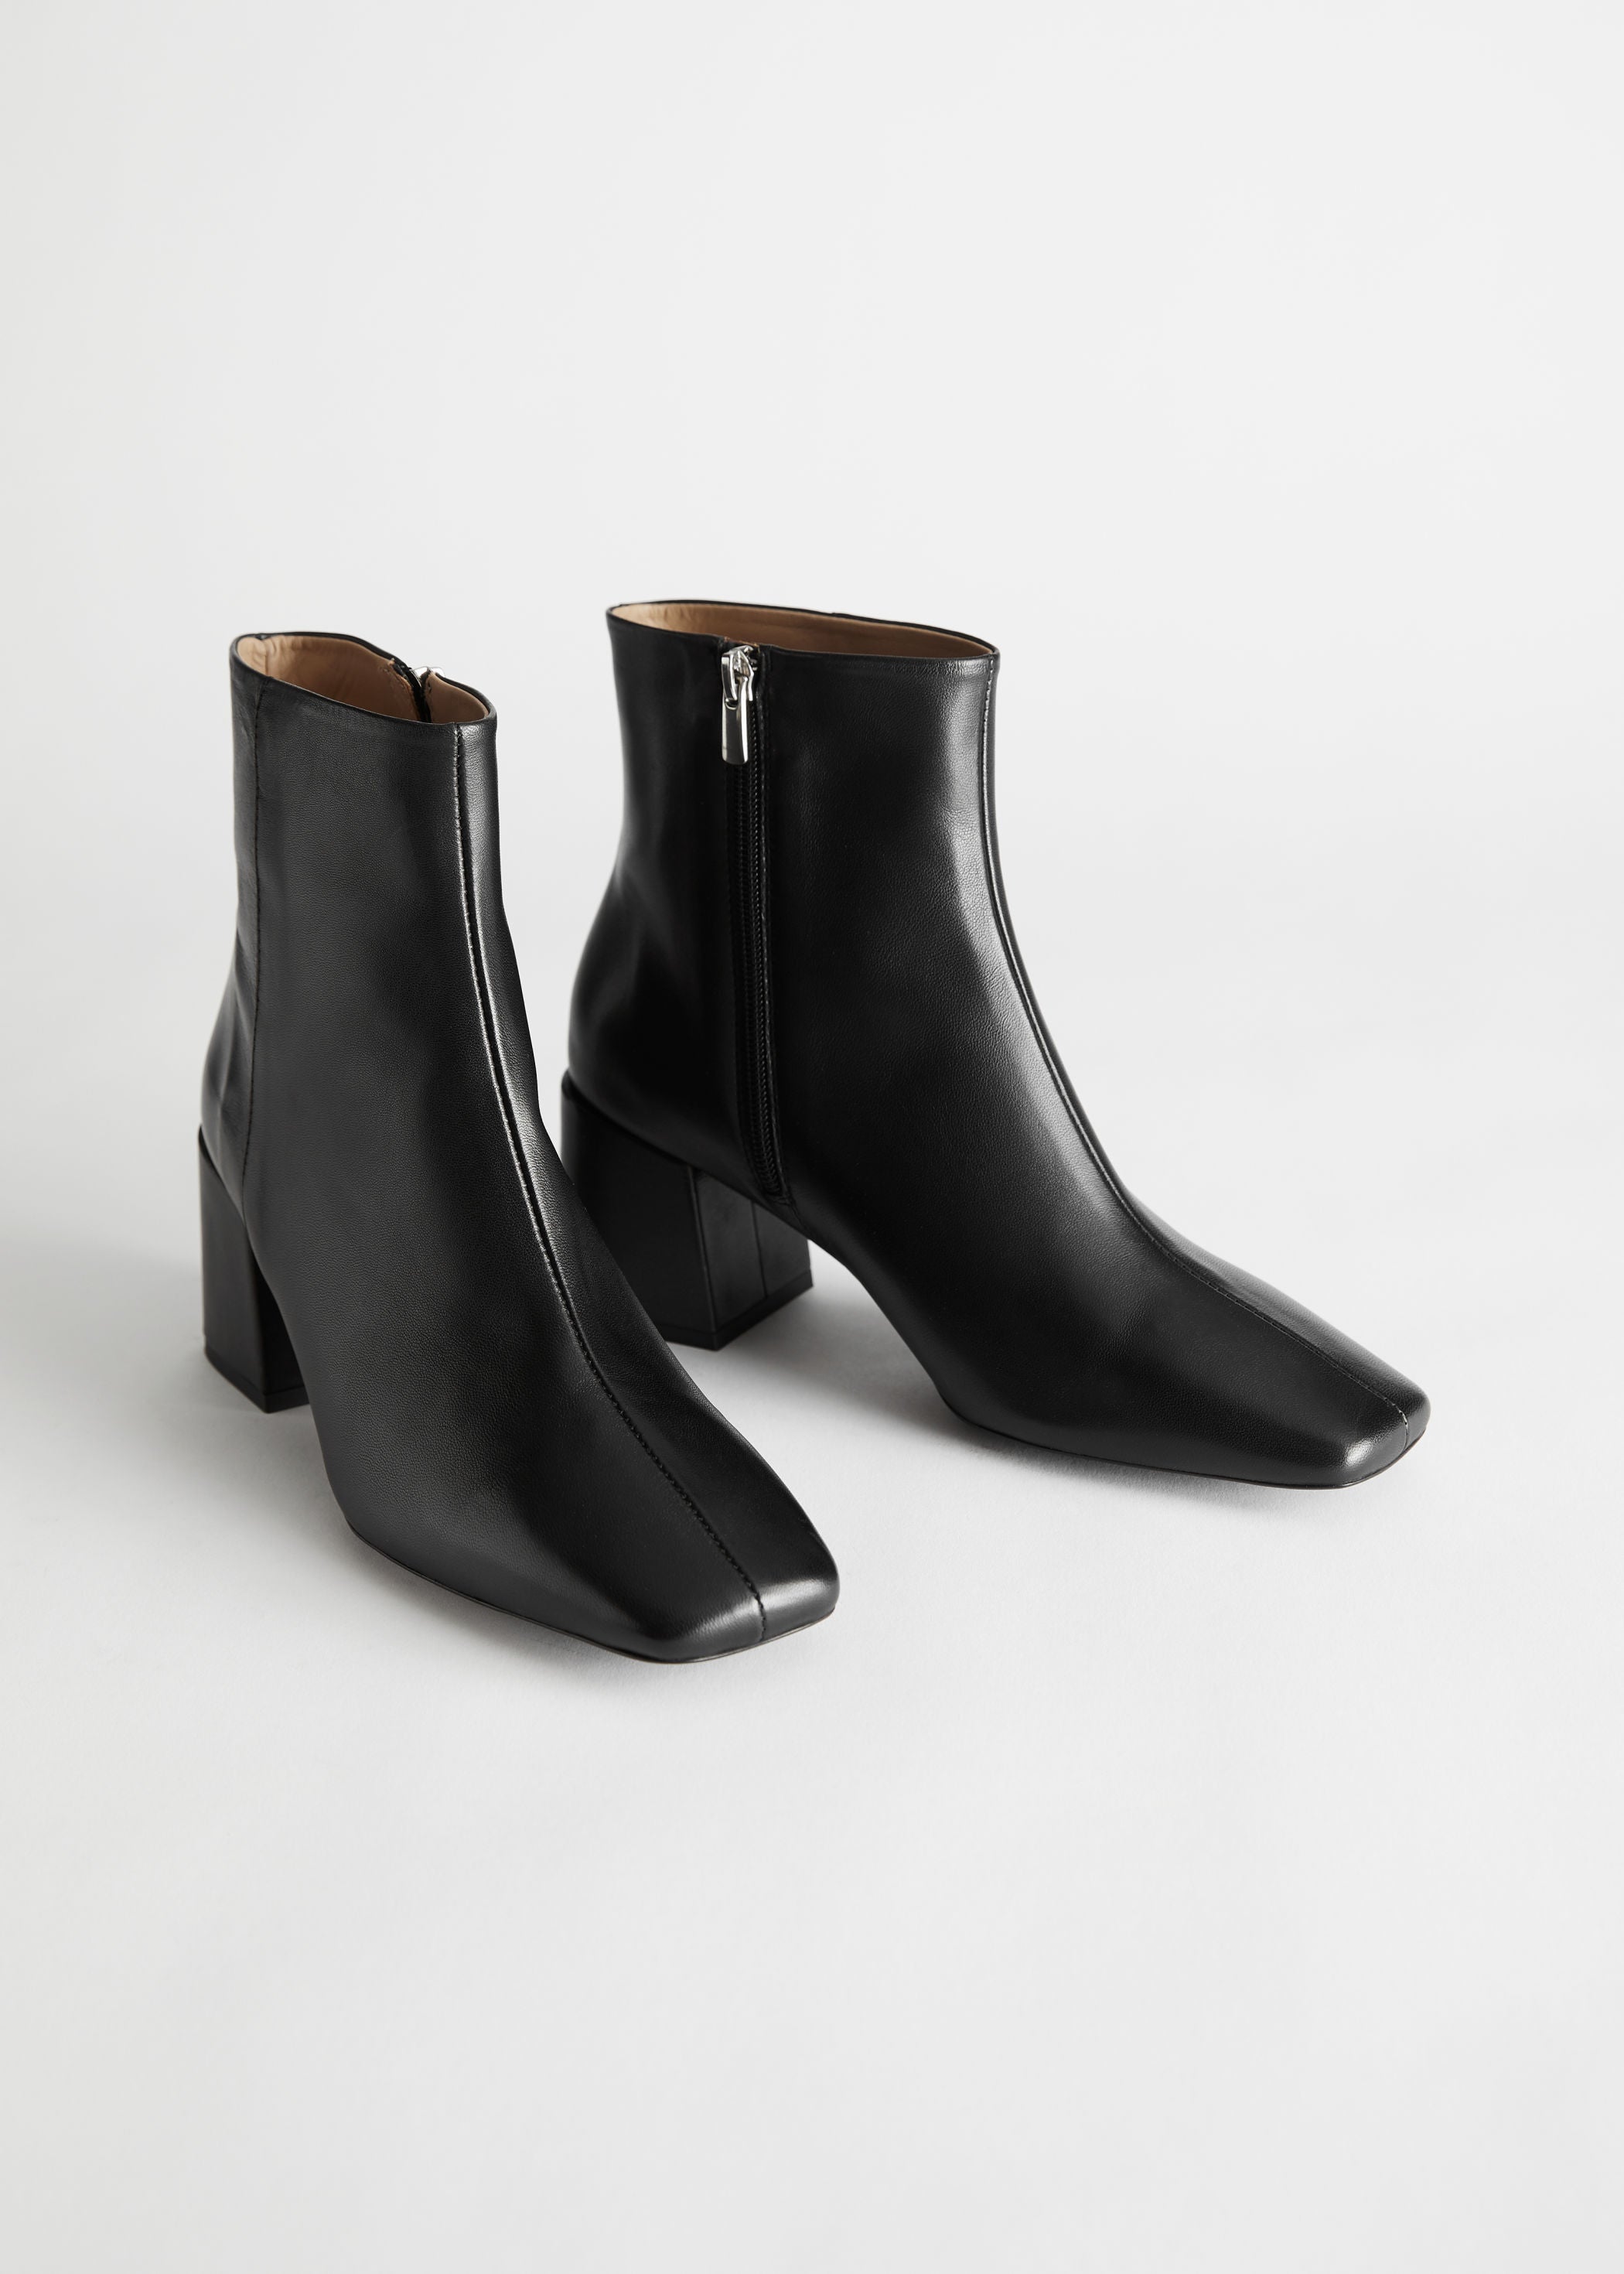 Leather Square Toe Heeled Boots